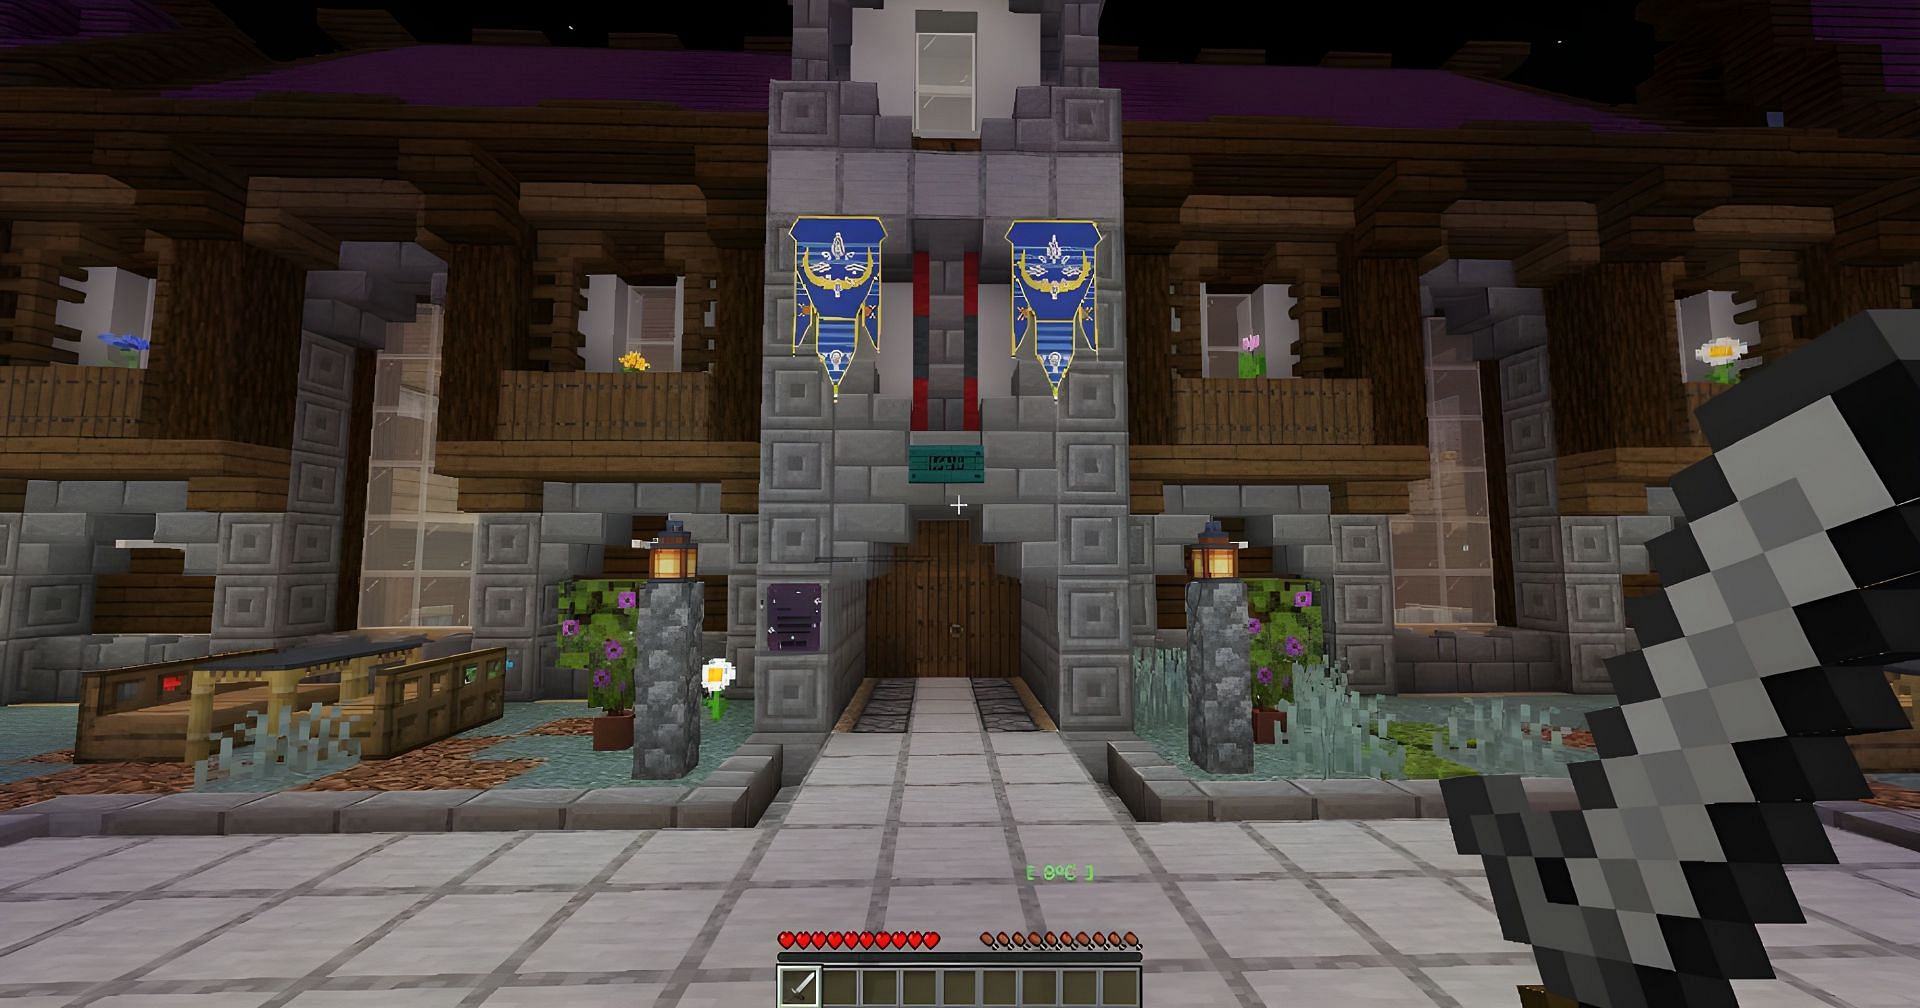 RPDND is great for those who love Minecraft and Dungeons &amp; Dragons (Image via Mojang)